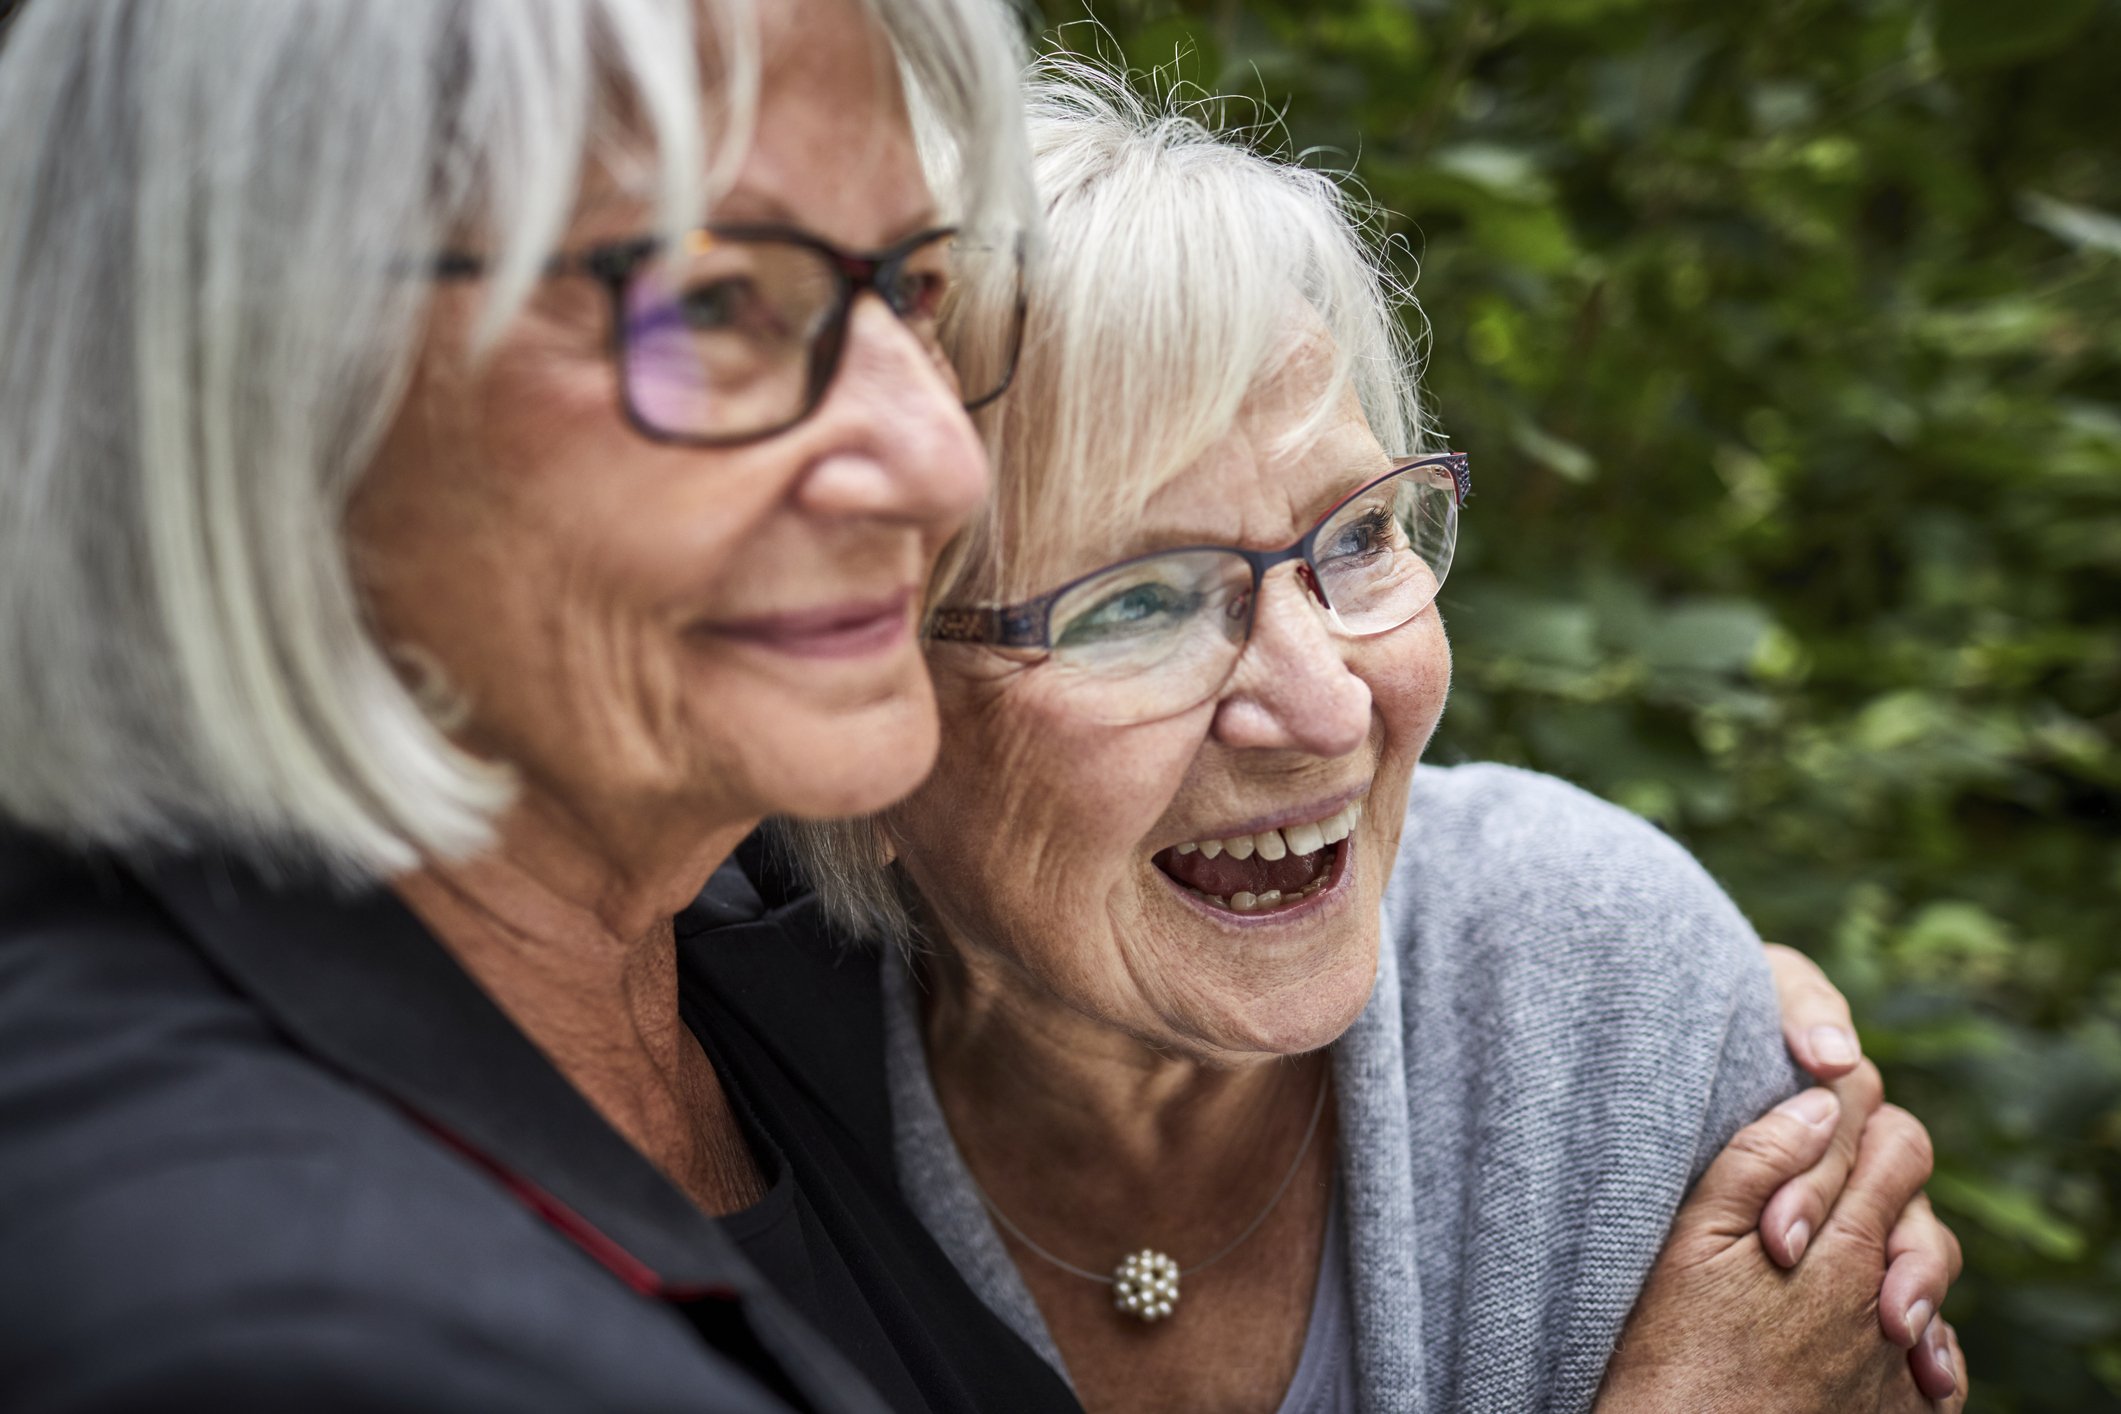 An image showing two senior women hugging each other in a garden. | Photo: Getty Images